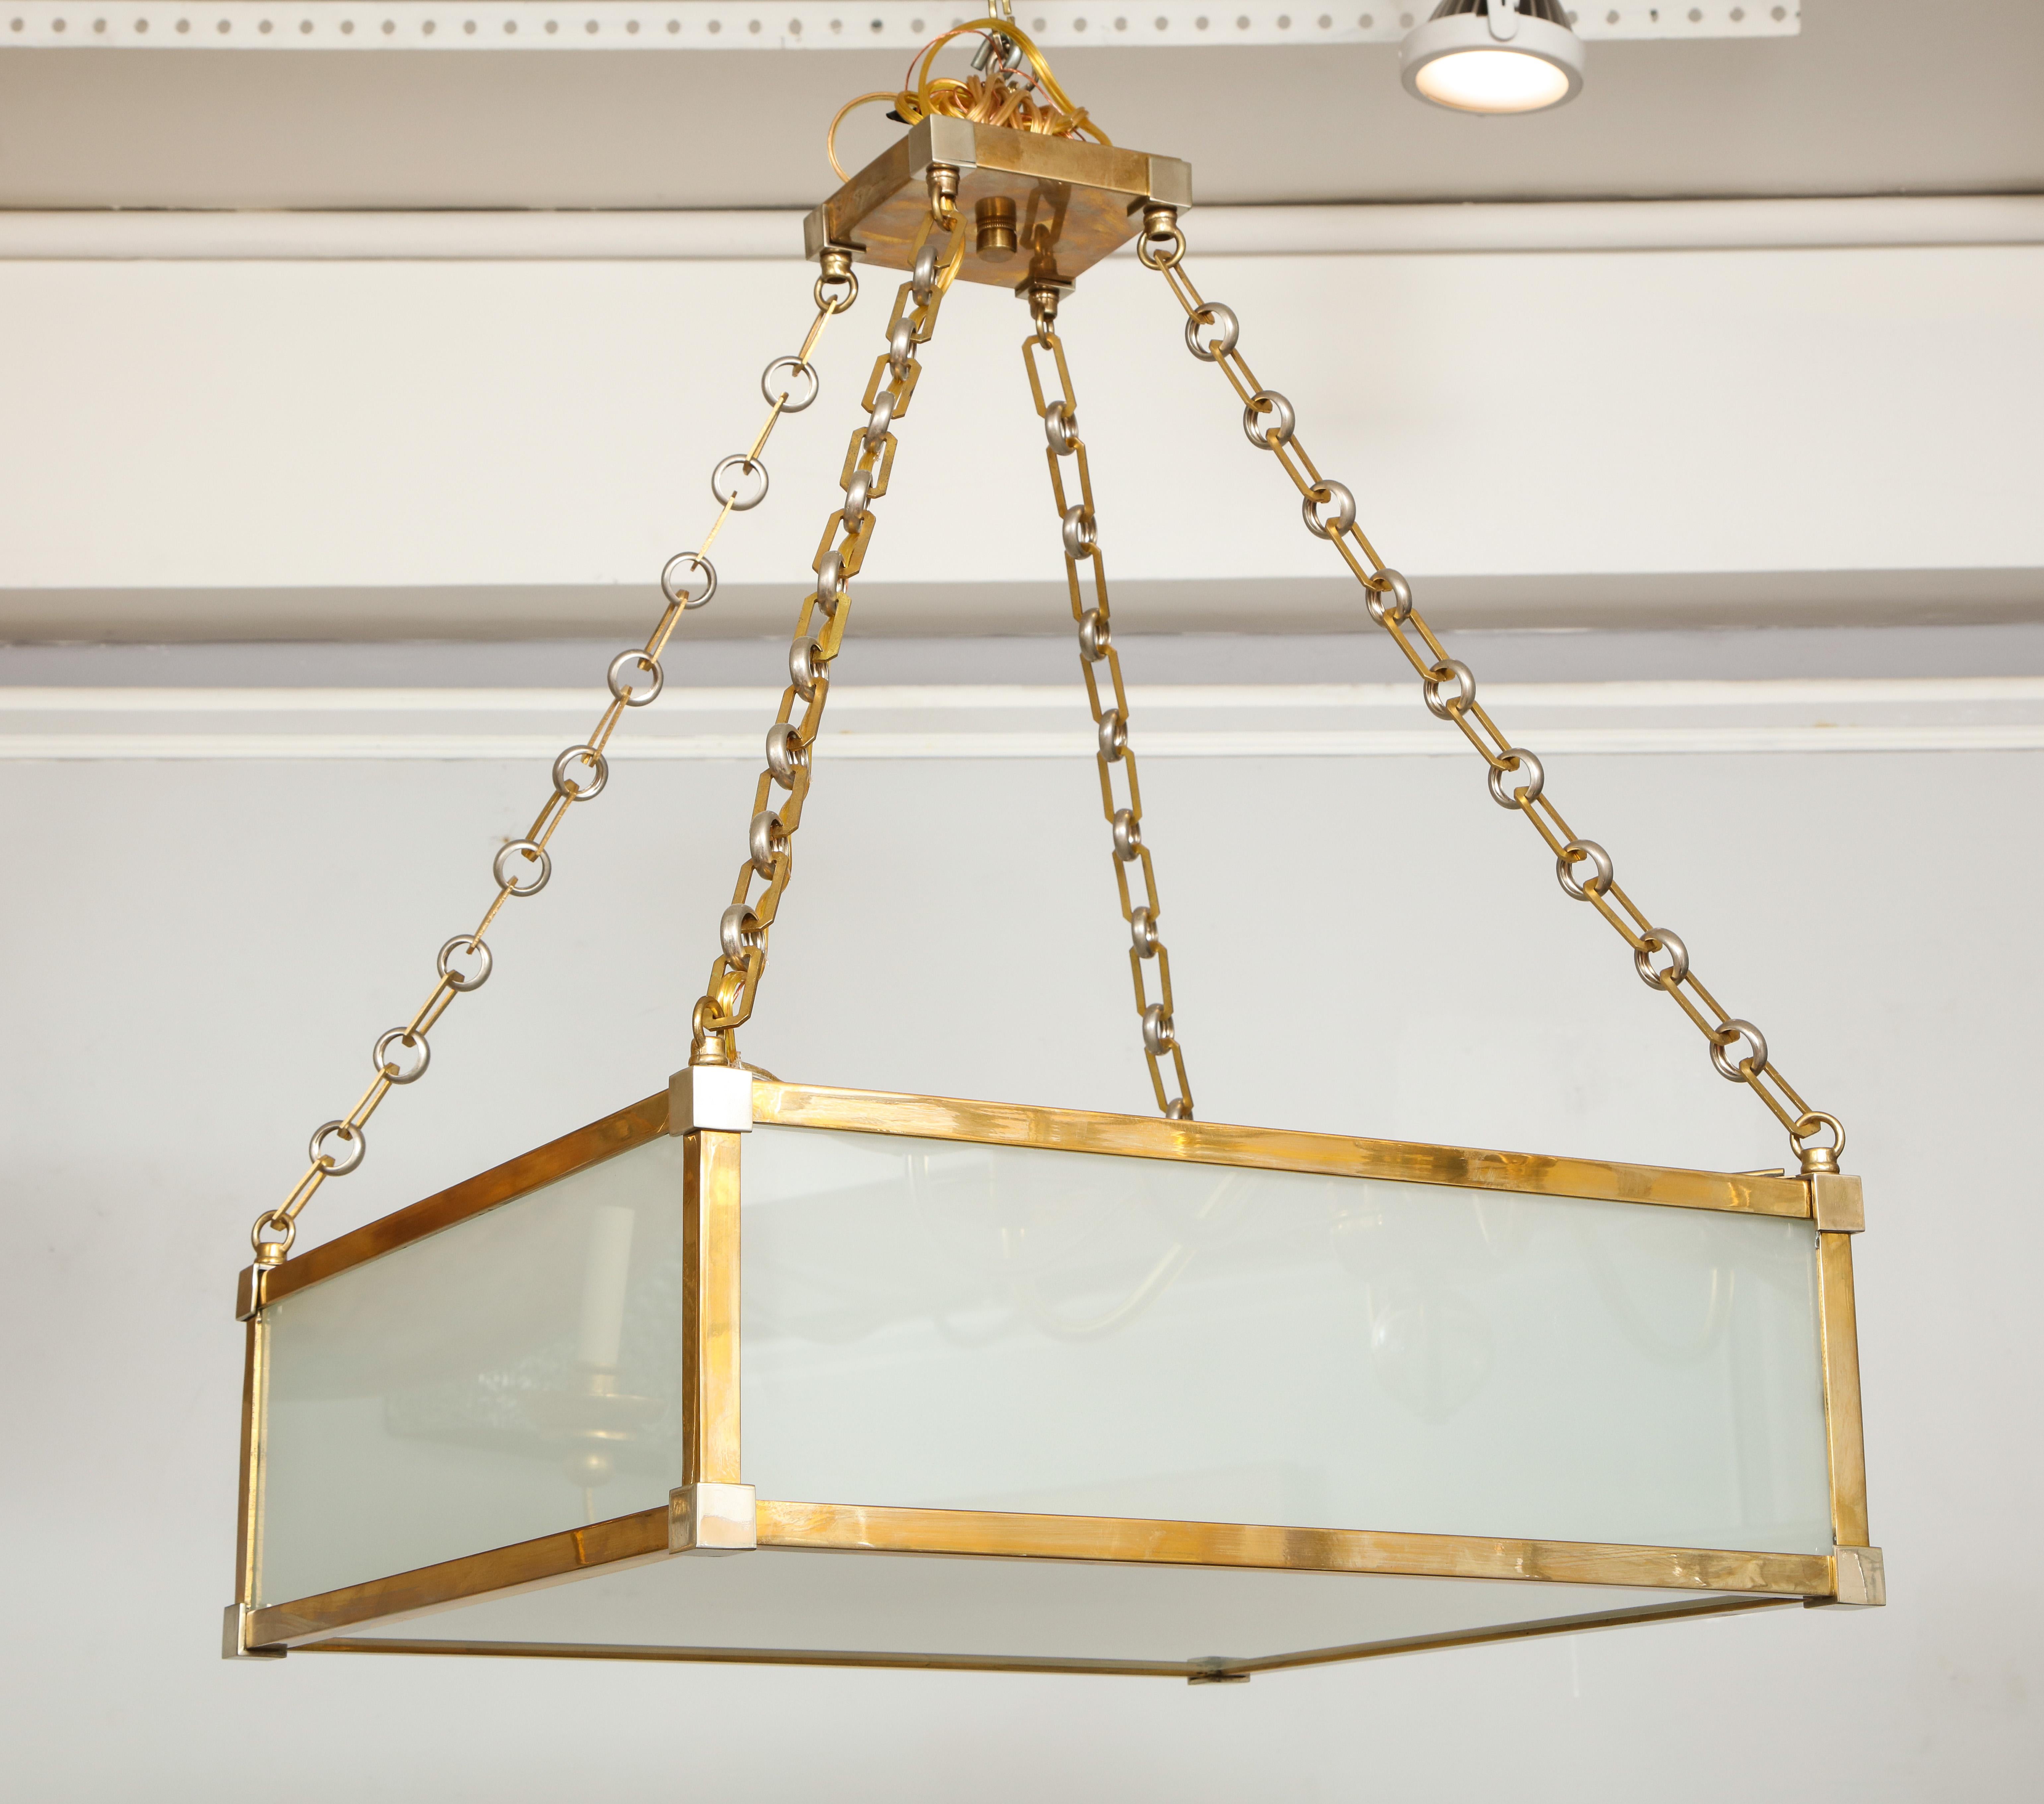 Modern Custom Art Deco Style Nickel and Brass-Plated Pendant Fixture For Sale